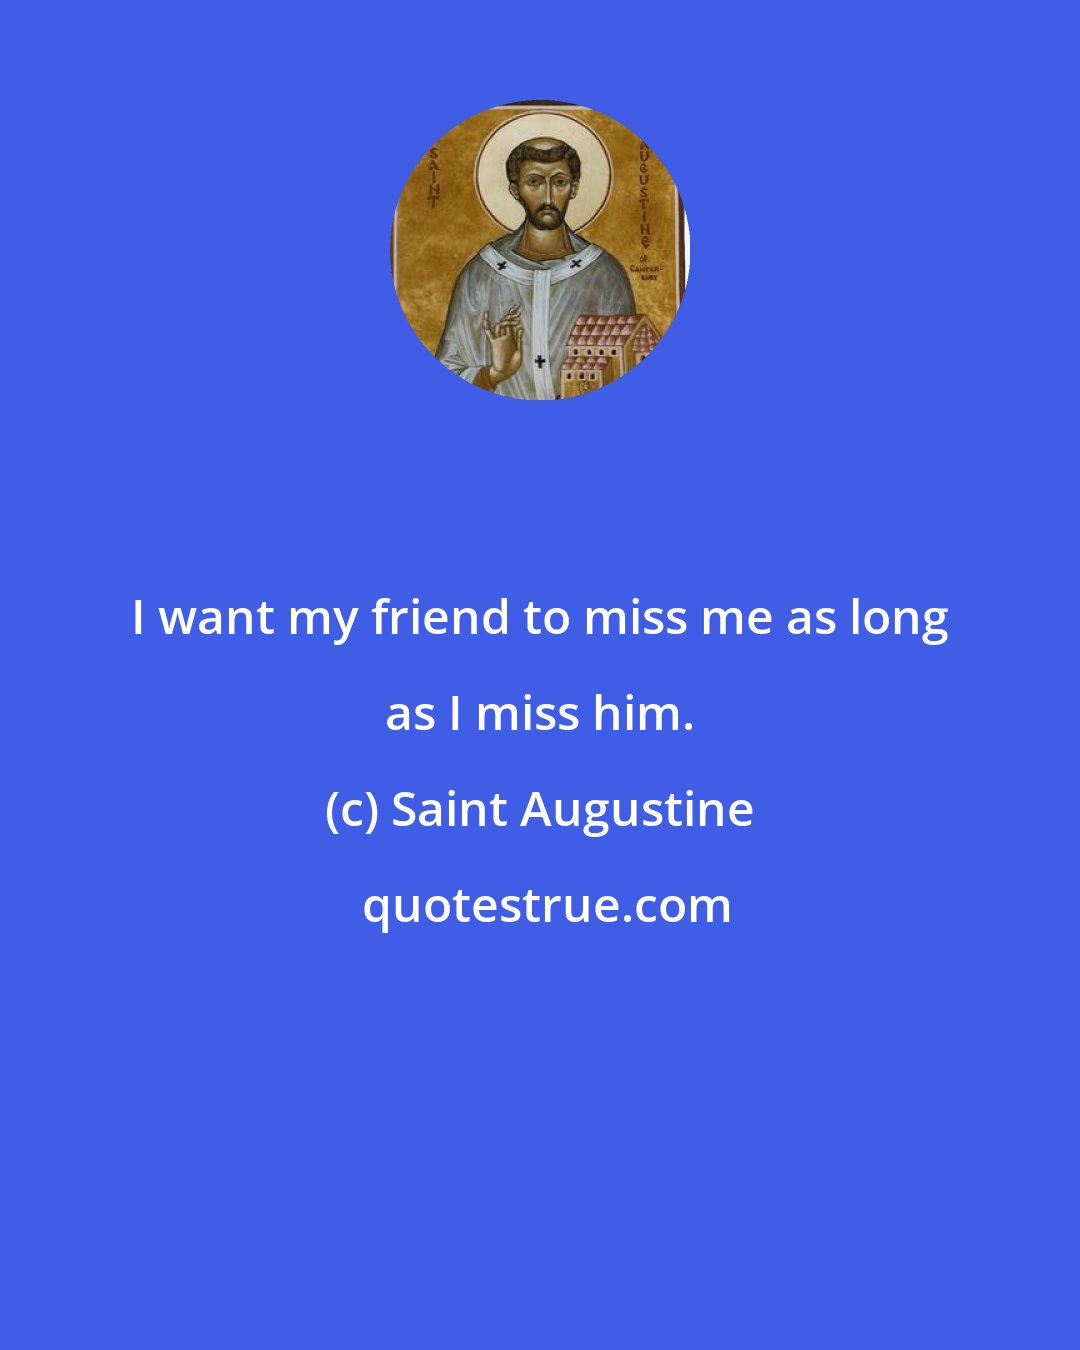 Saint Augustine: I want my friend to miss me as long as I miss him.